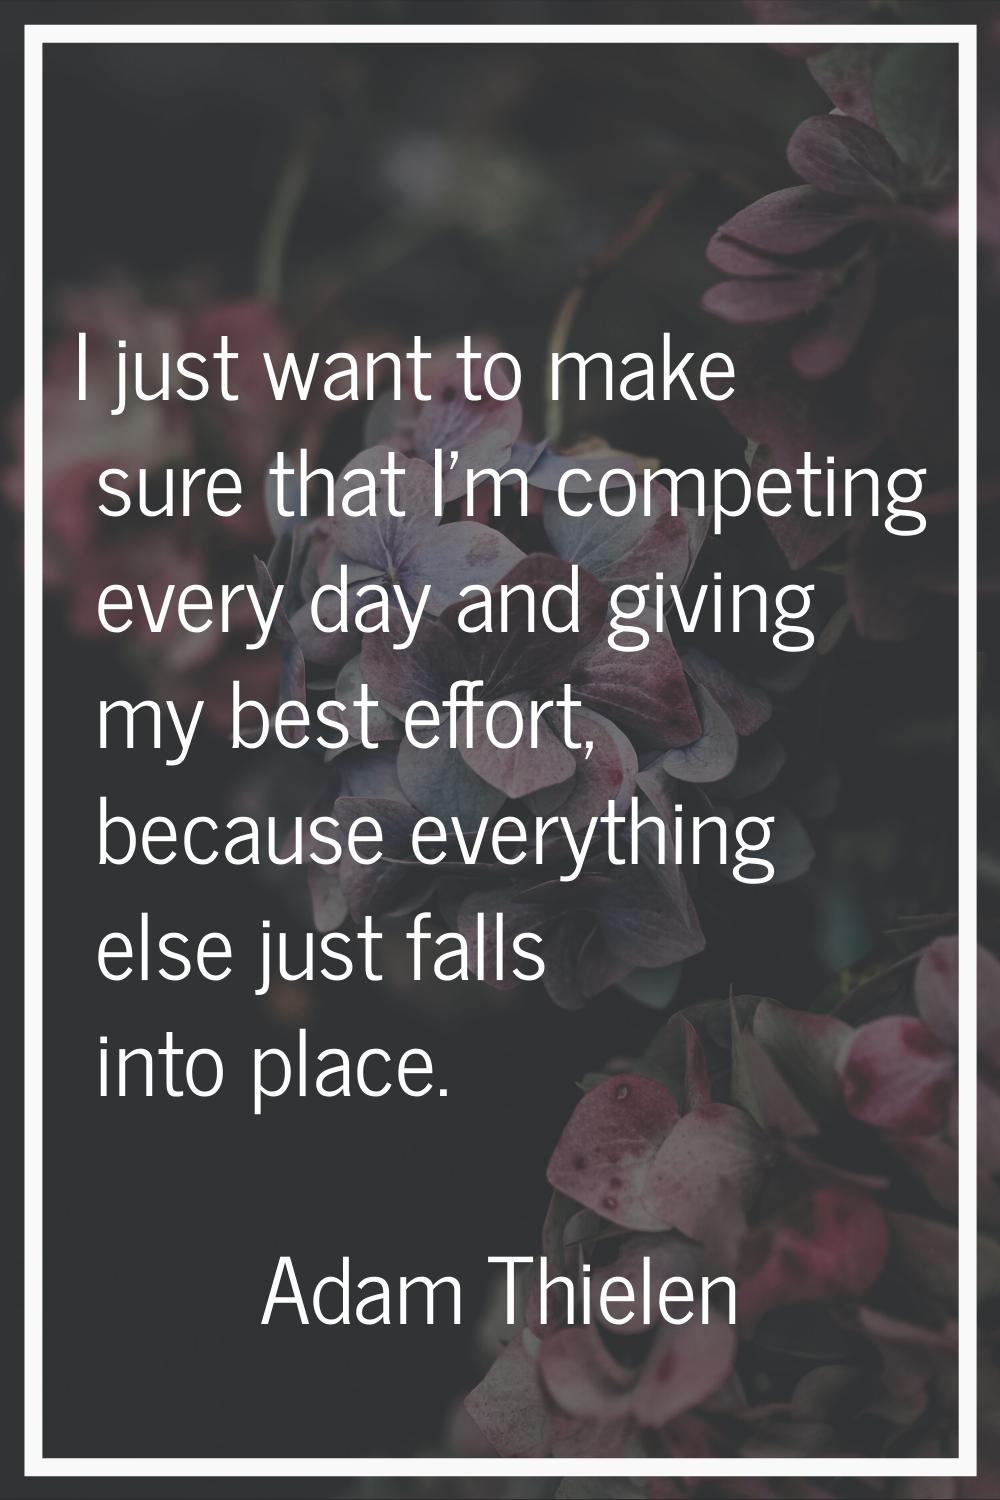 I just want to make sure that I'm competing every day and giving my best effort, because everything